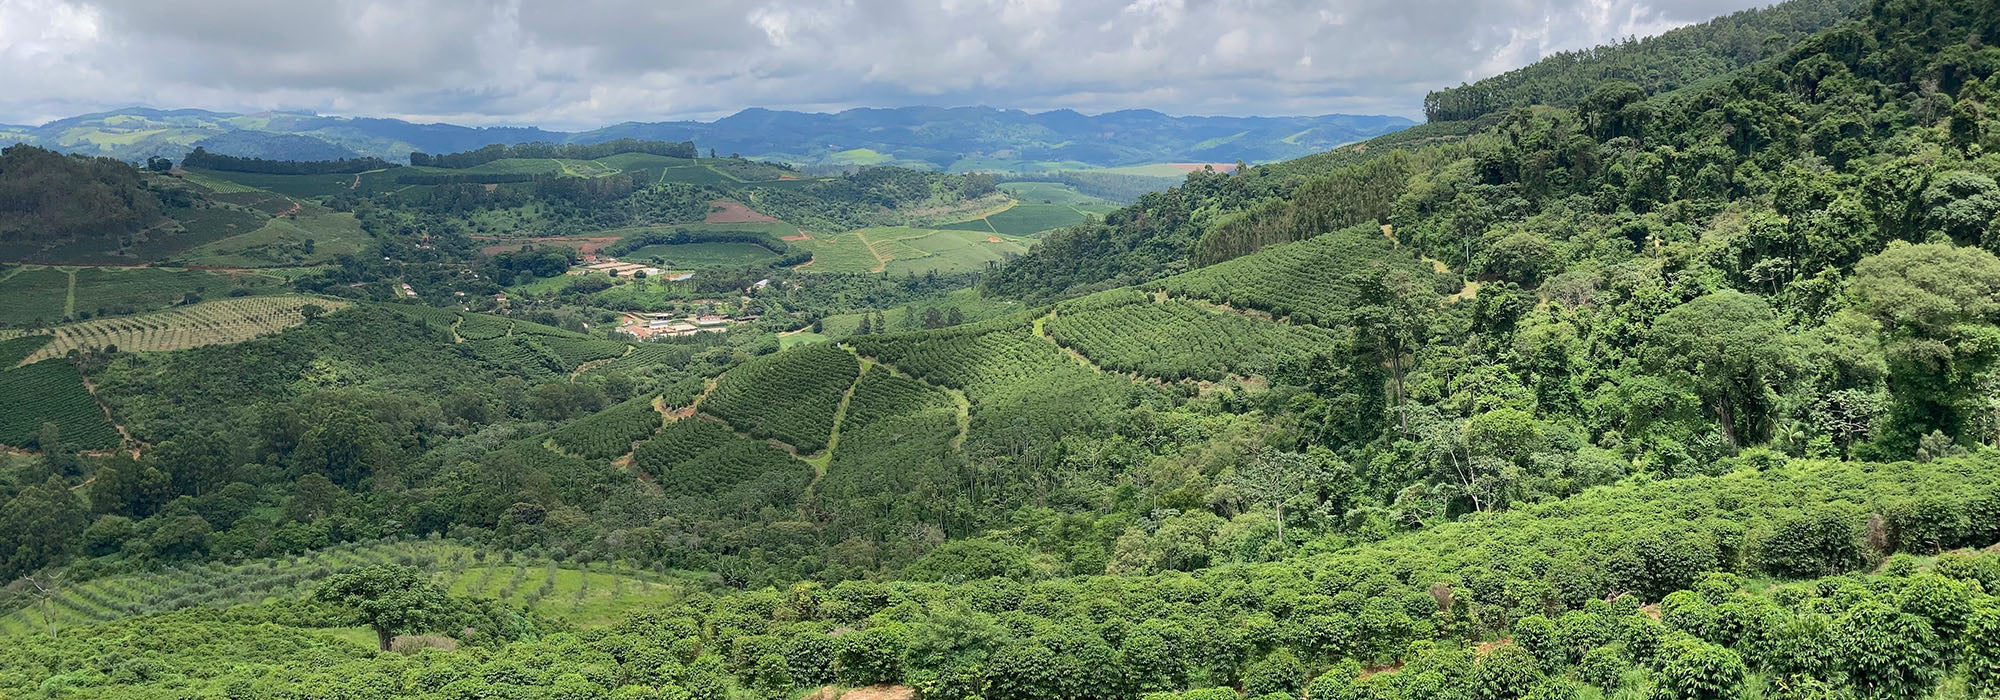 Coffees From Our Family Farms in Brazil